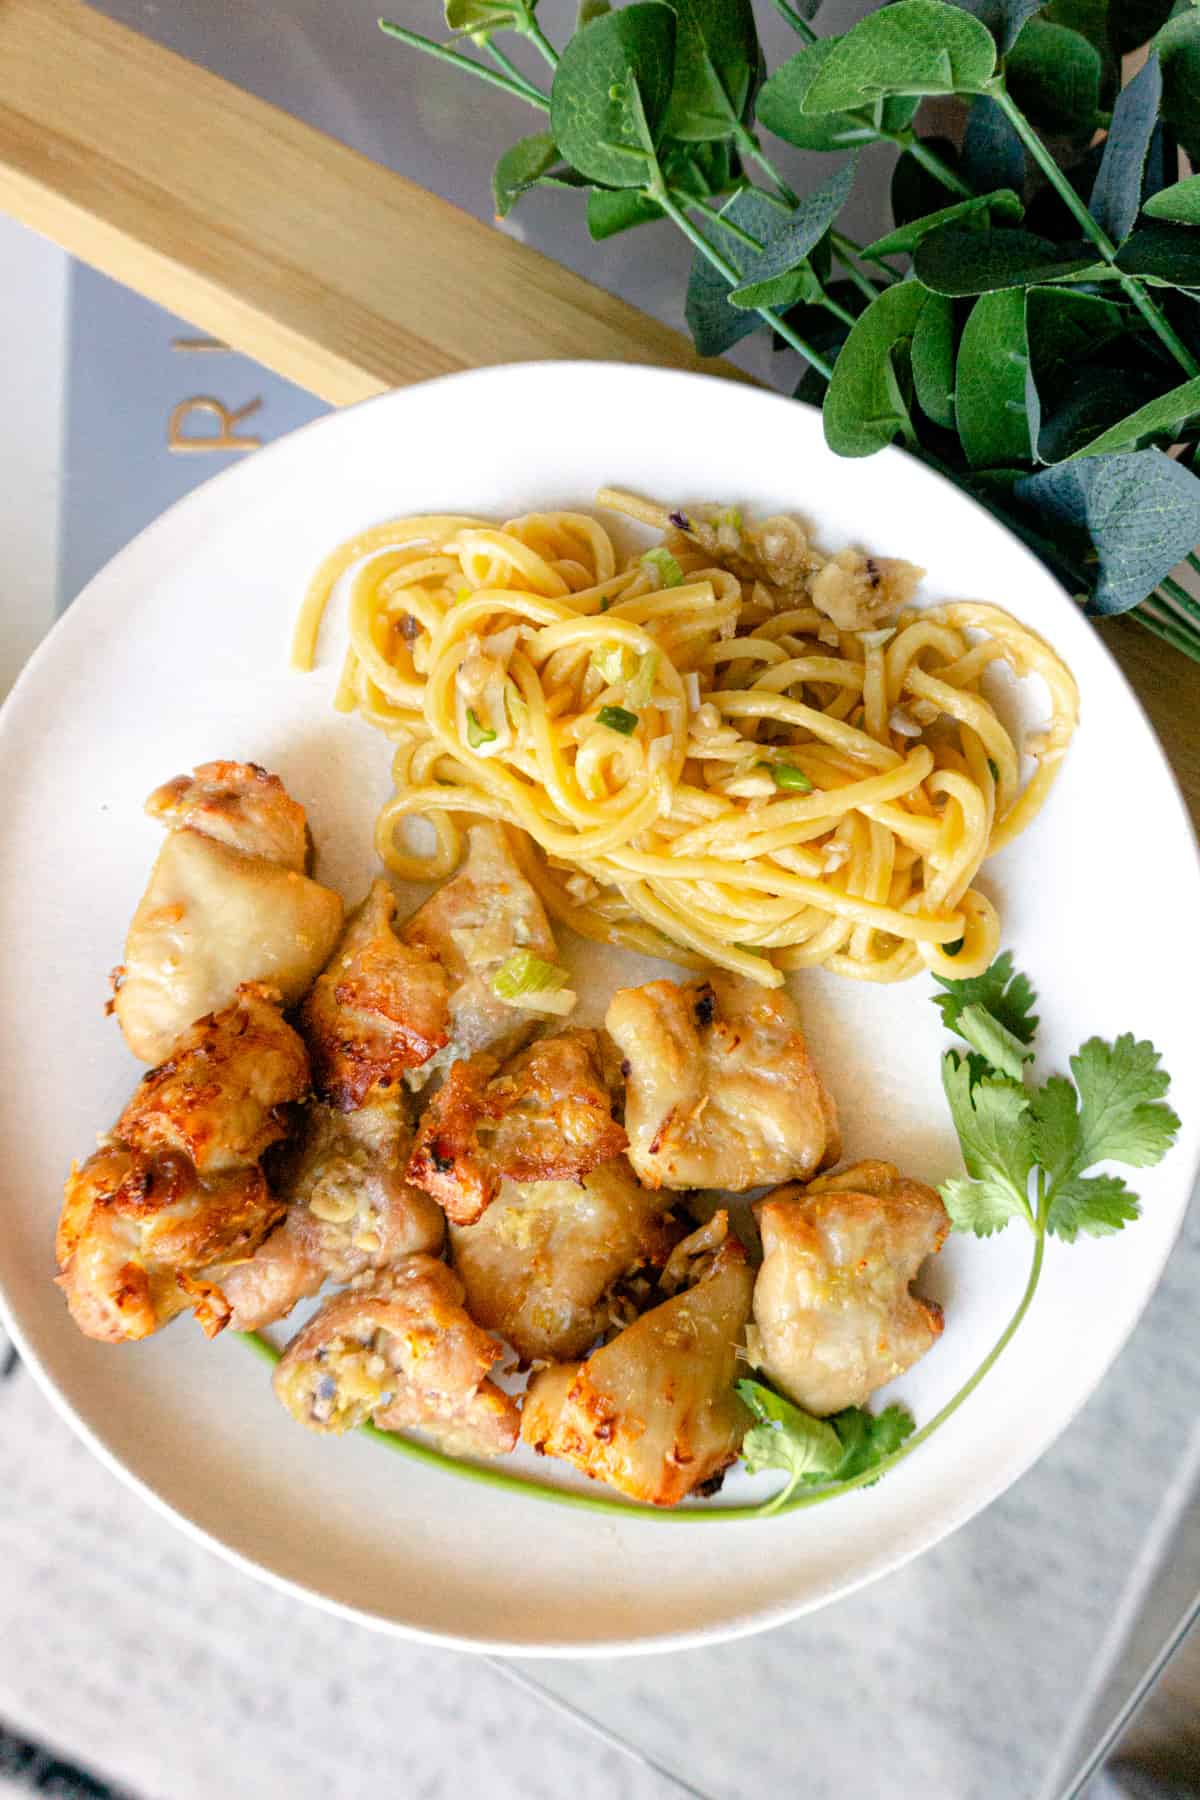 A plate of lemongrass chicken with garlic noodles.